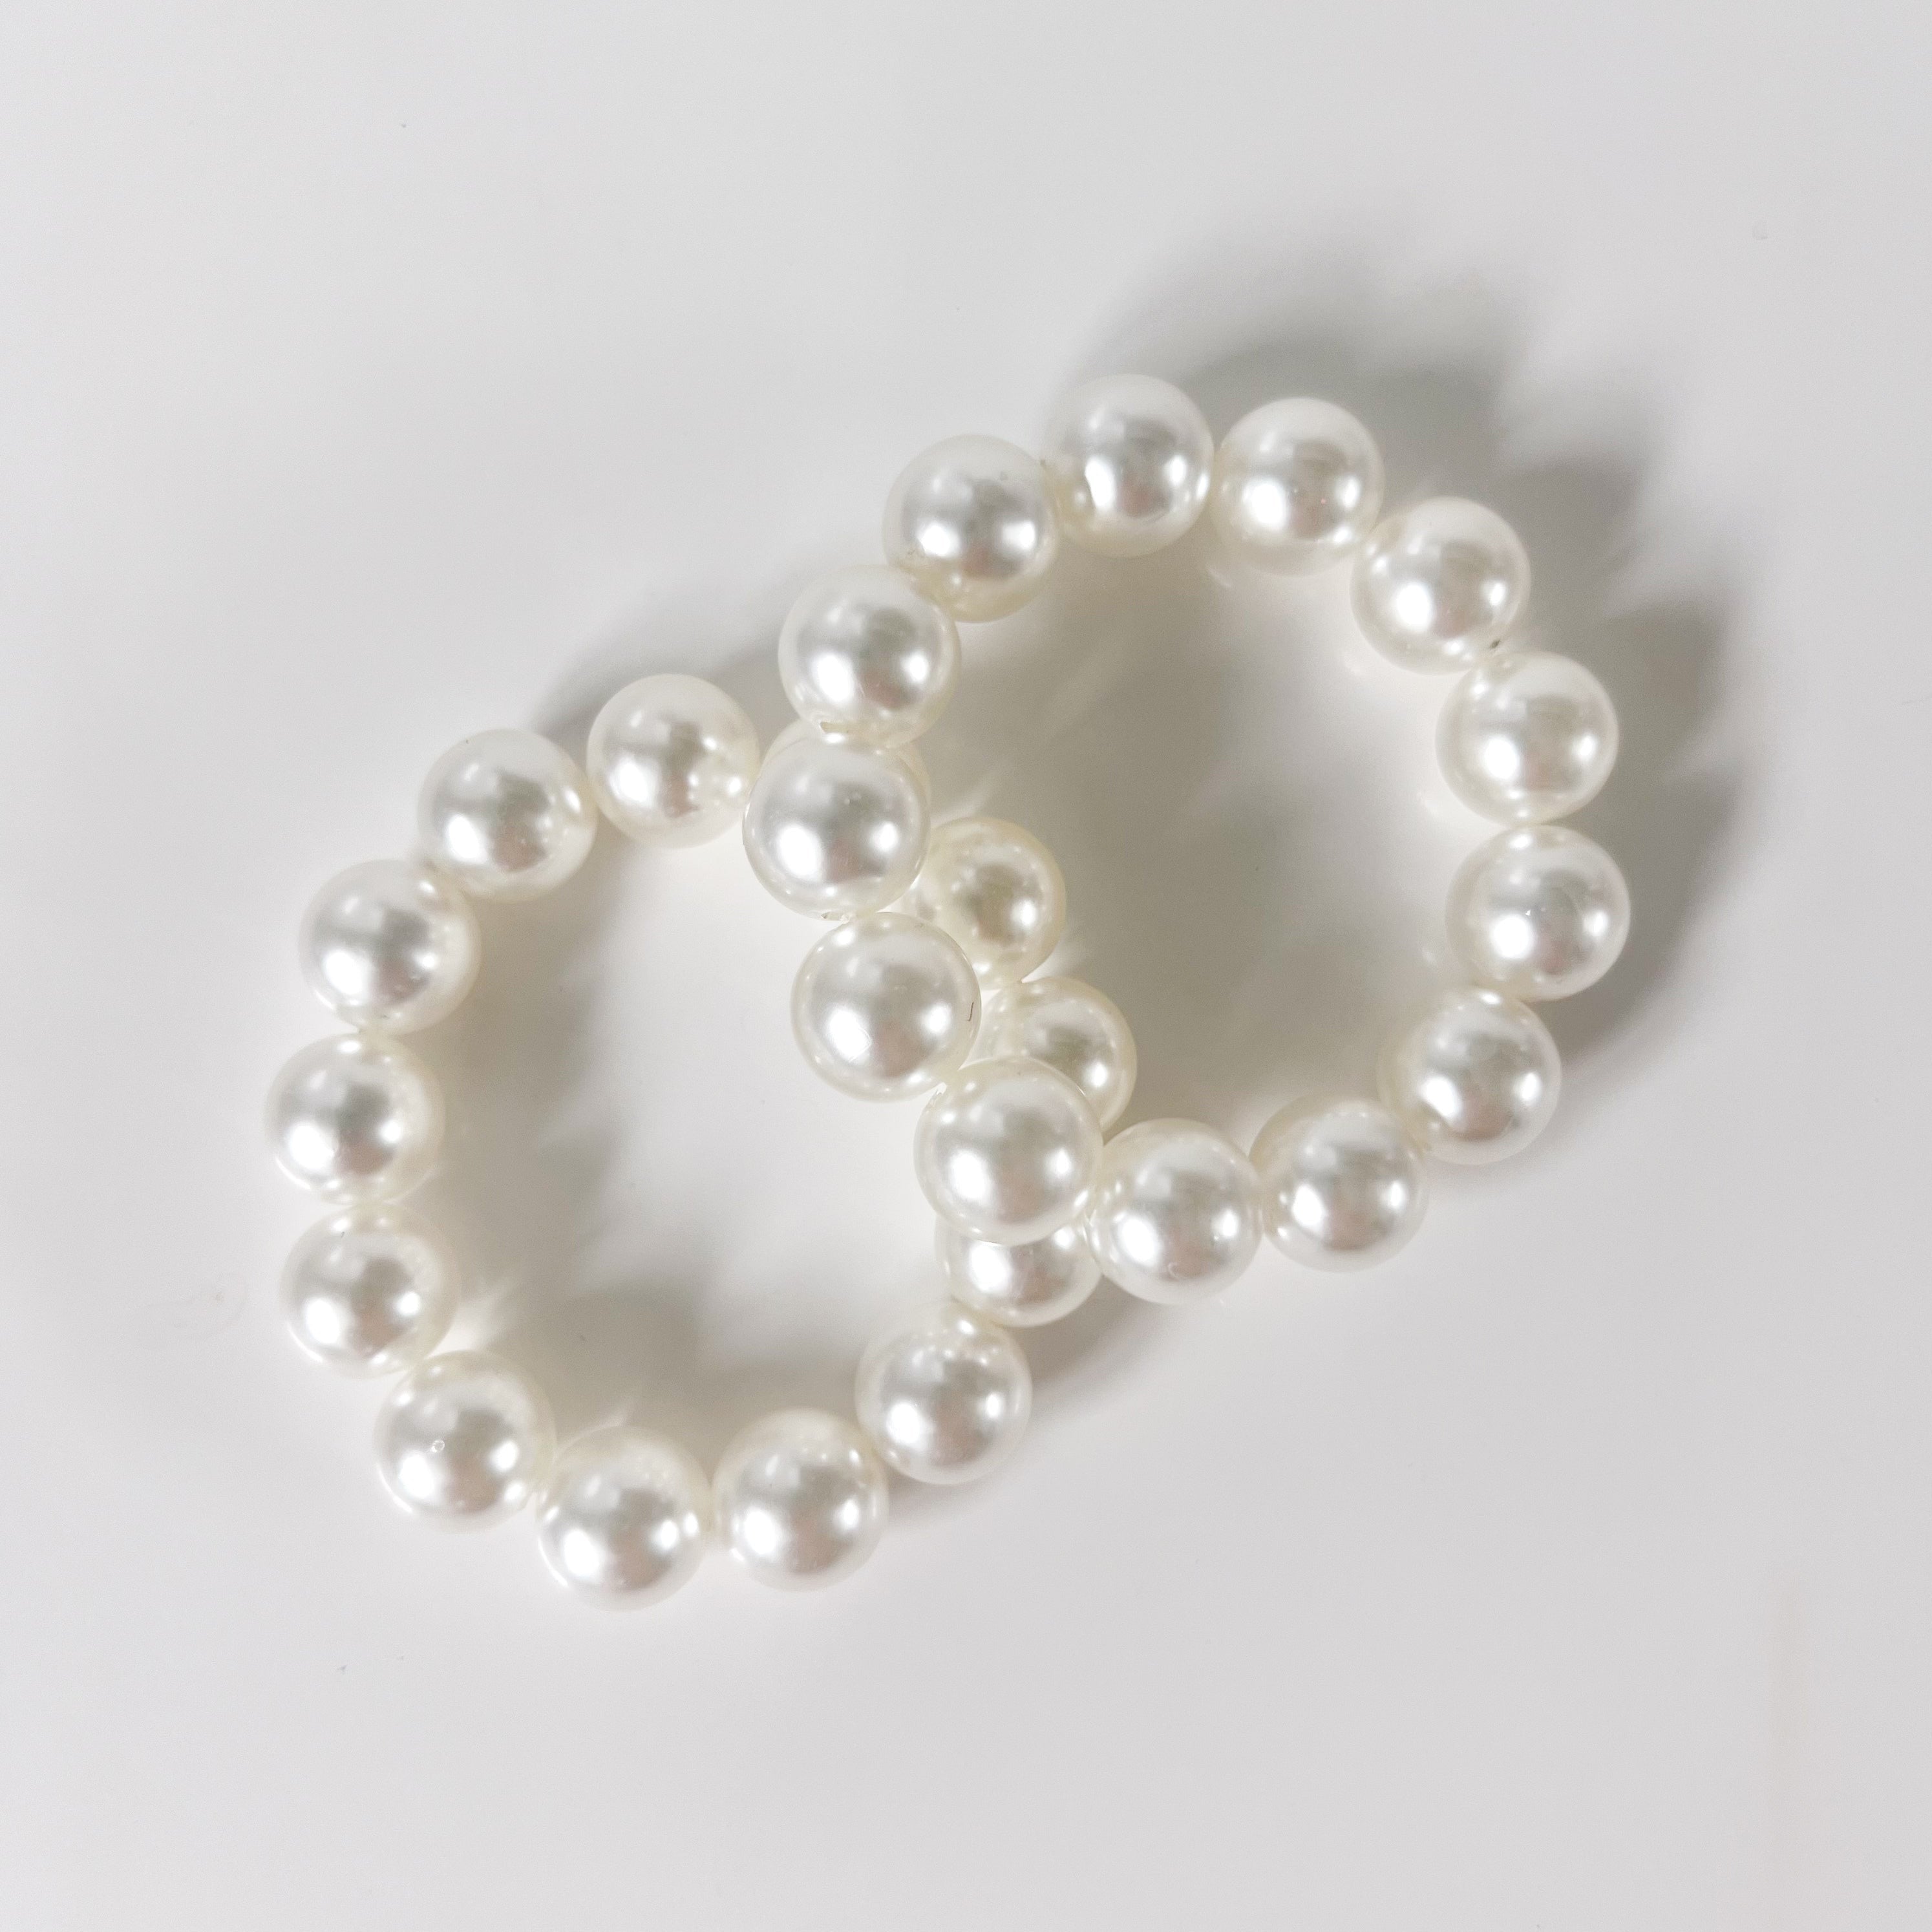 two elastics with pearls threaded through them